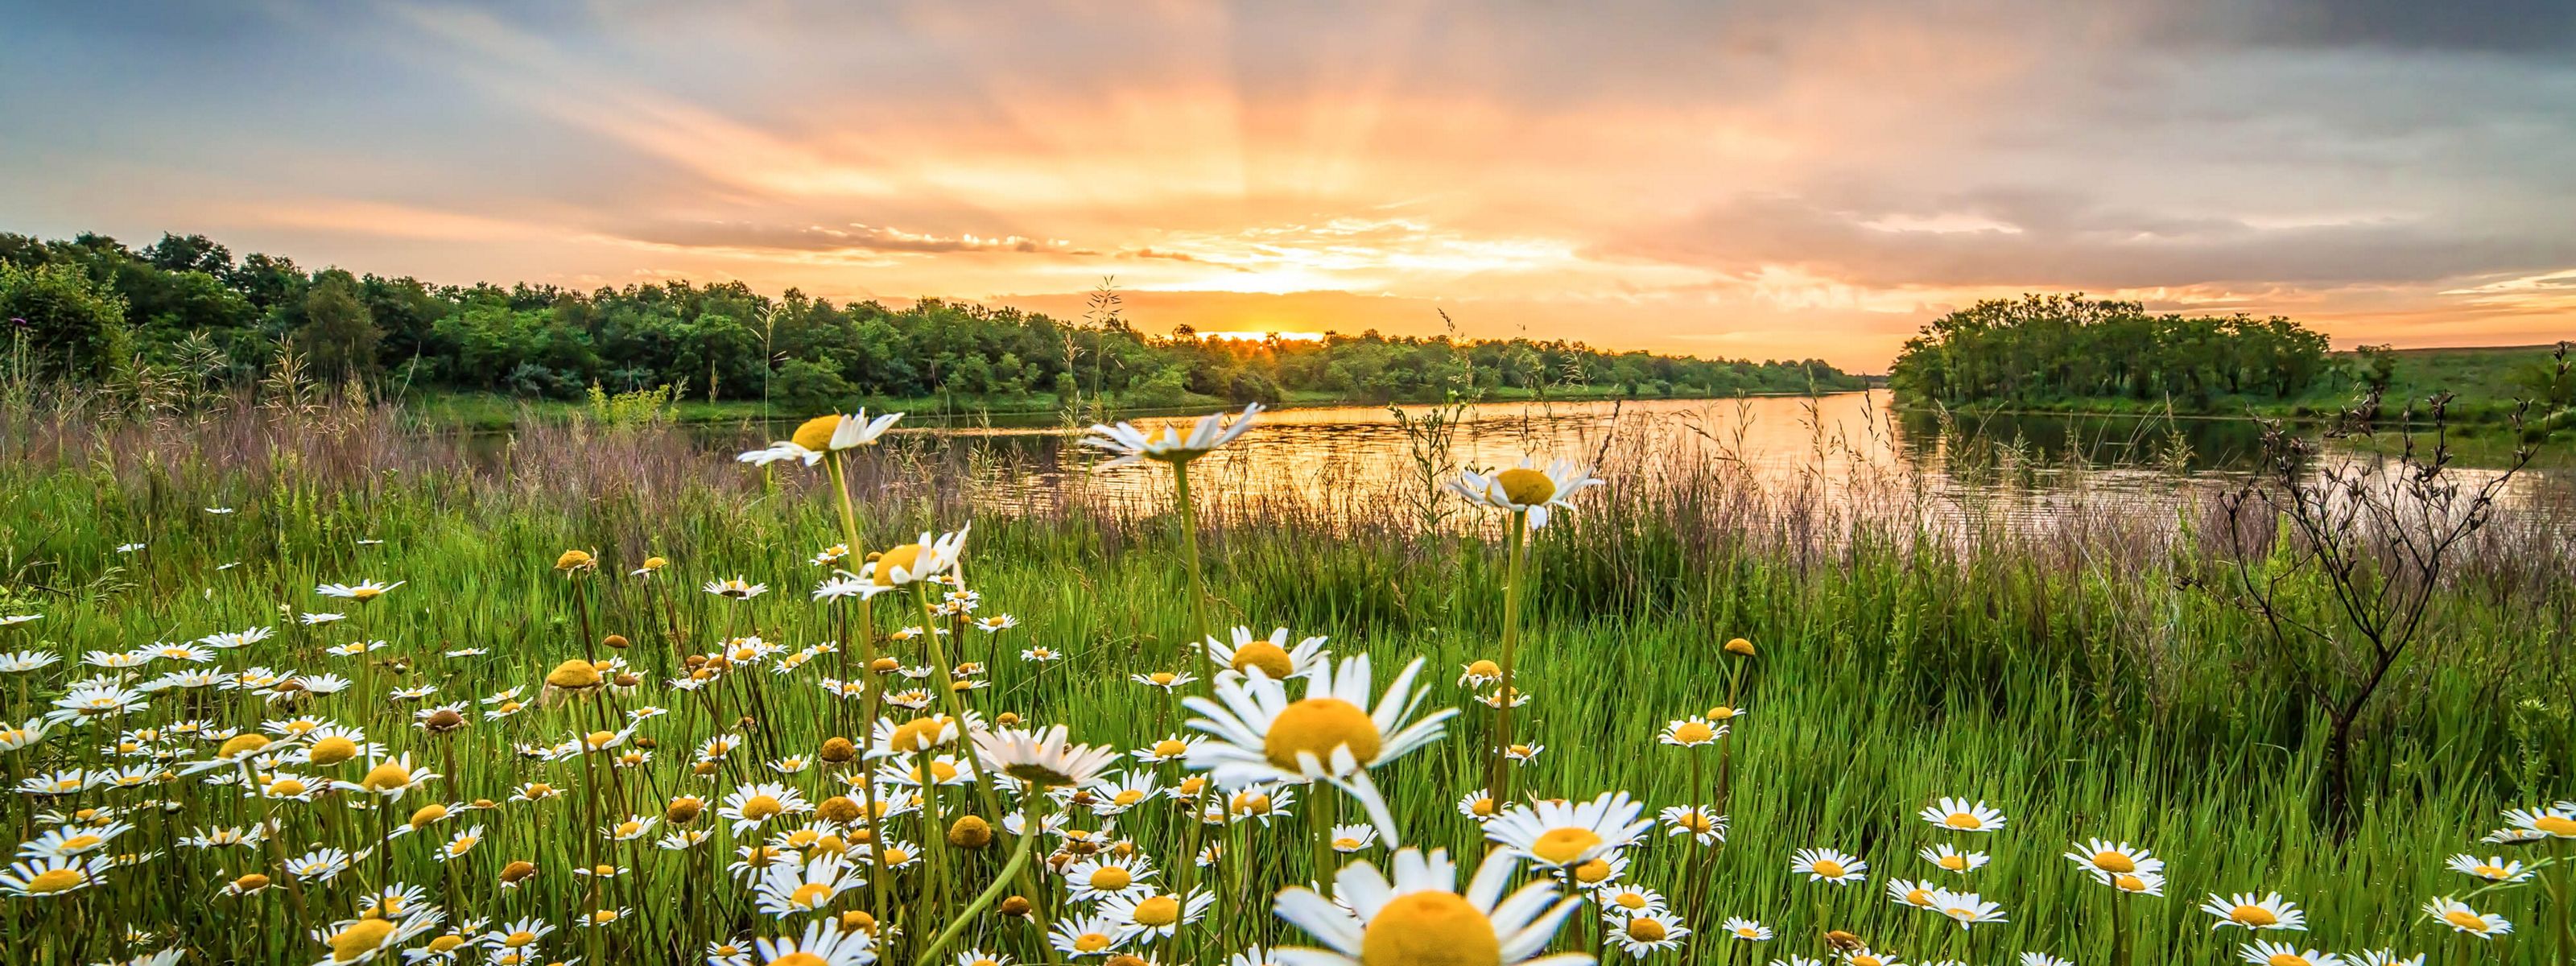 Field of green populated with daisies next to a wetland at sunrise.